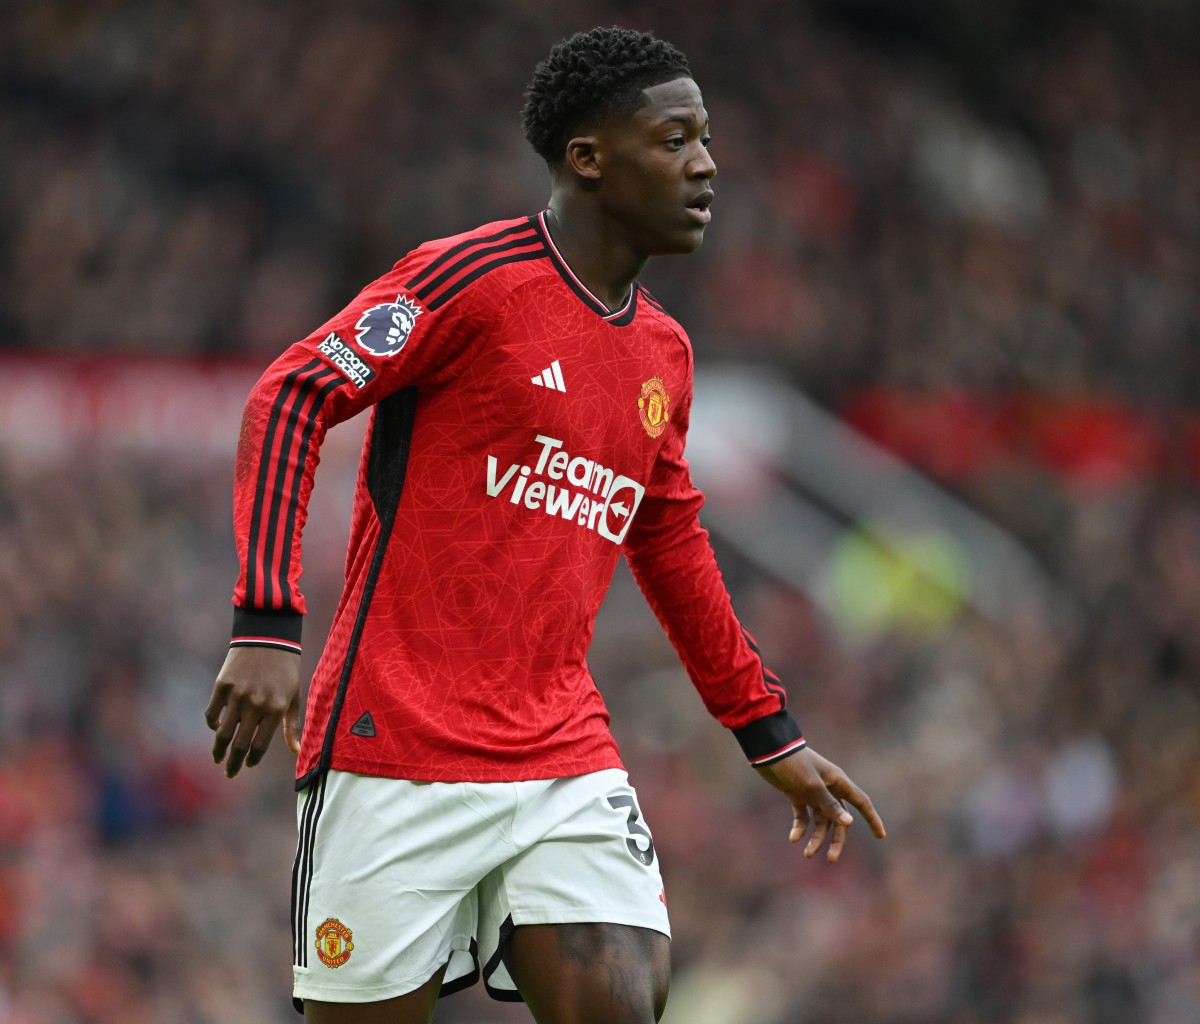 Man United are set to offer Kobbie Mainoo a contract extension